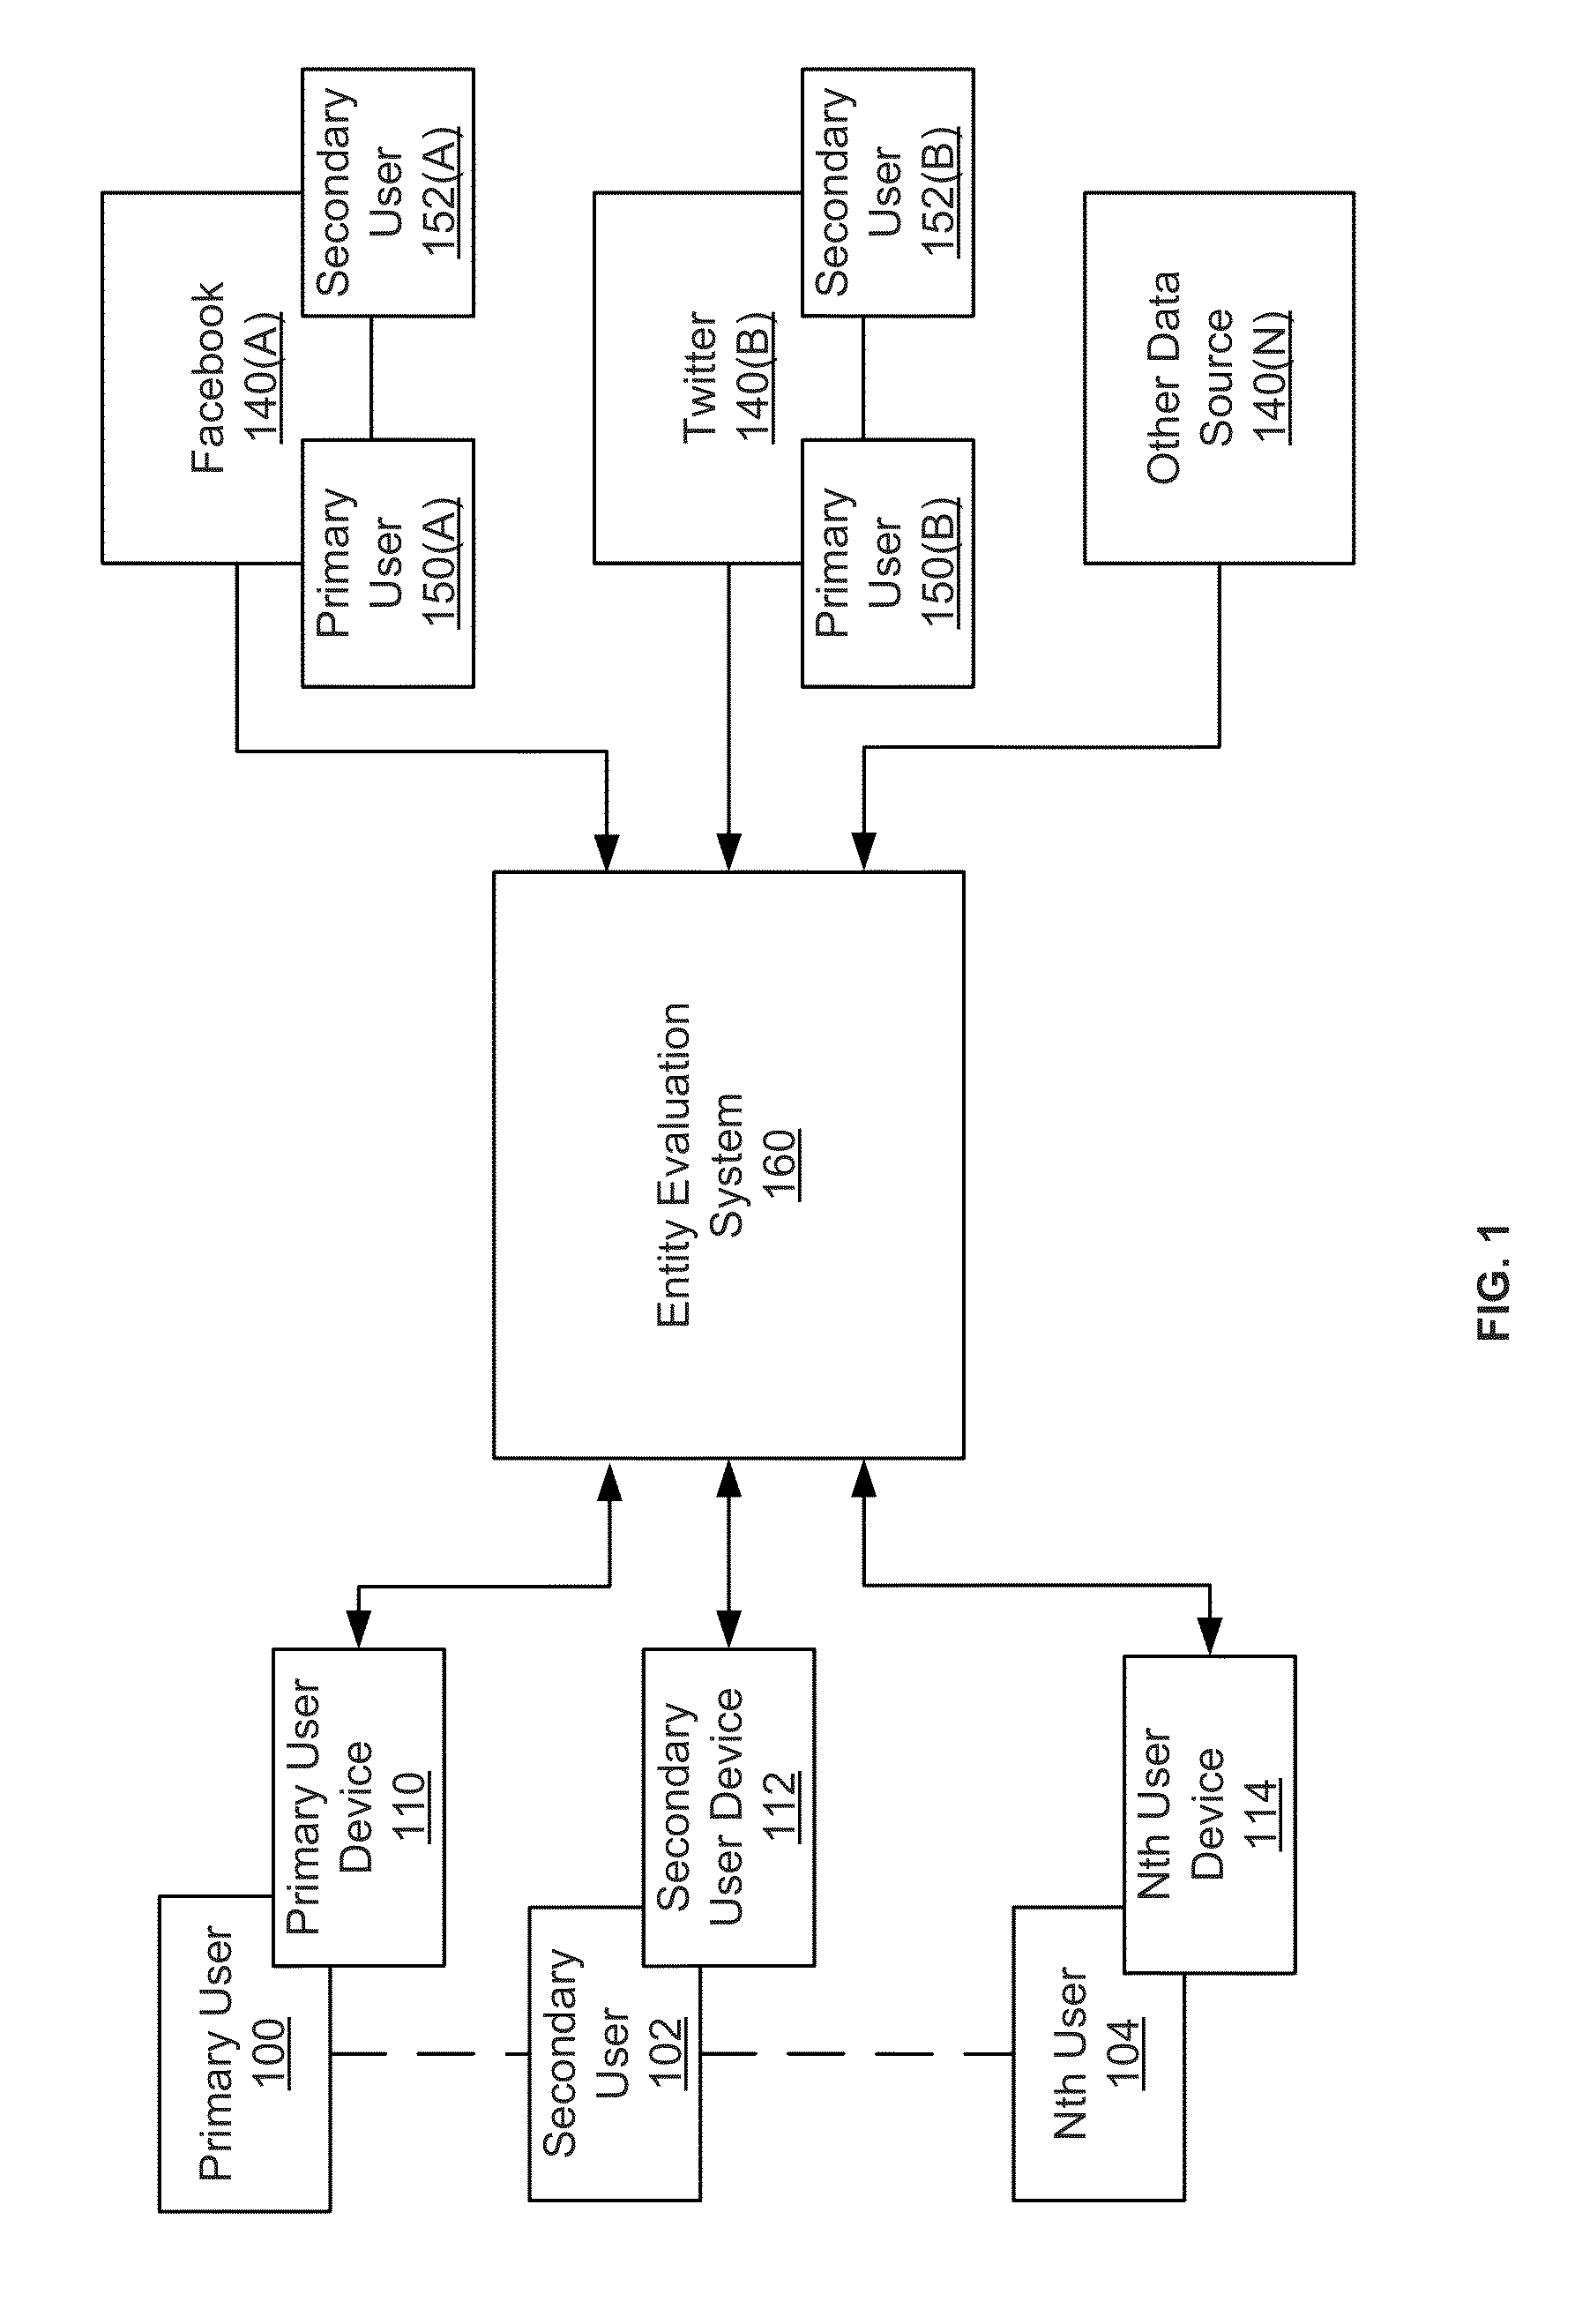 Method and apparatus for quickly evaluating entities